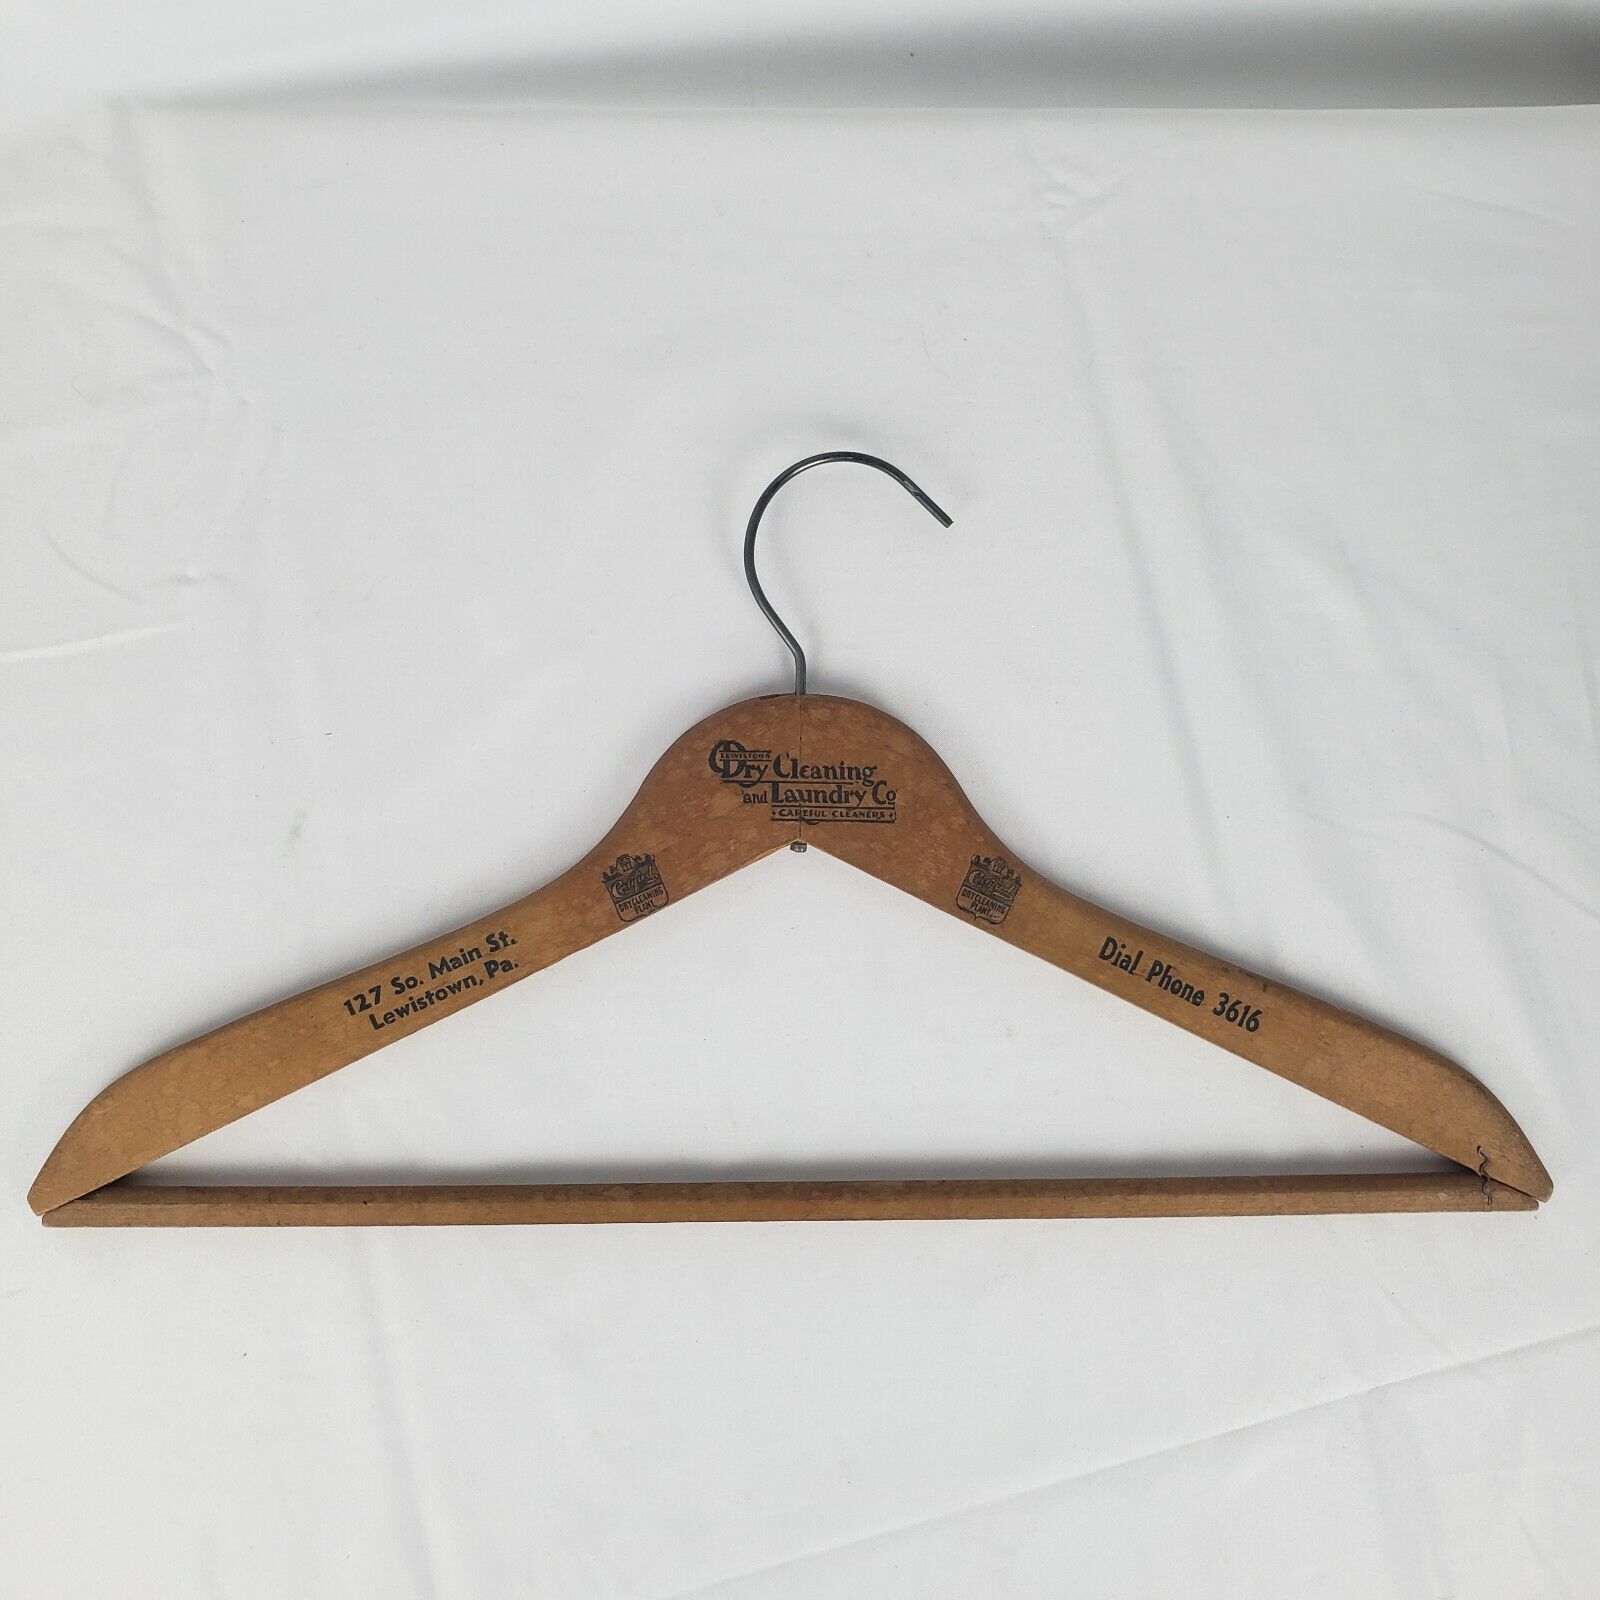 Antique Lewistown Dry Cleaning & Laundry Company Clothing Hanger Pennsylvania